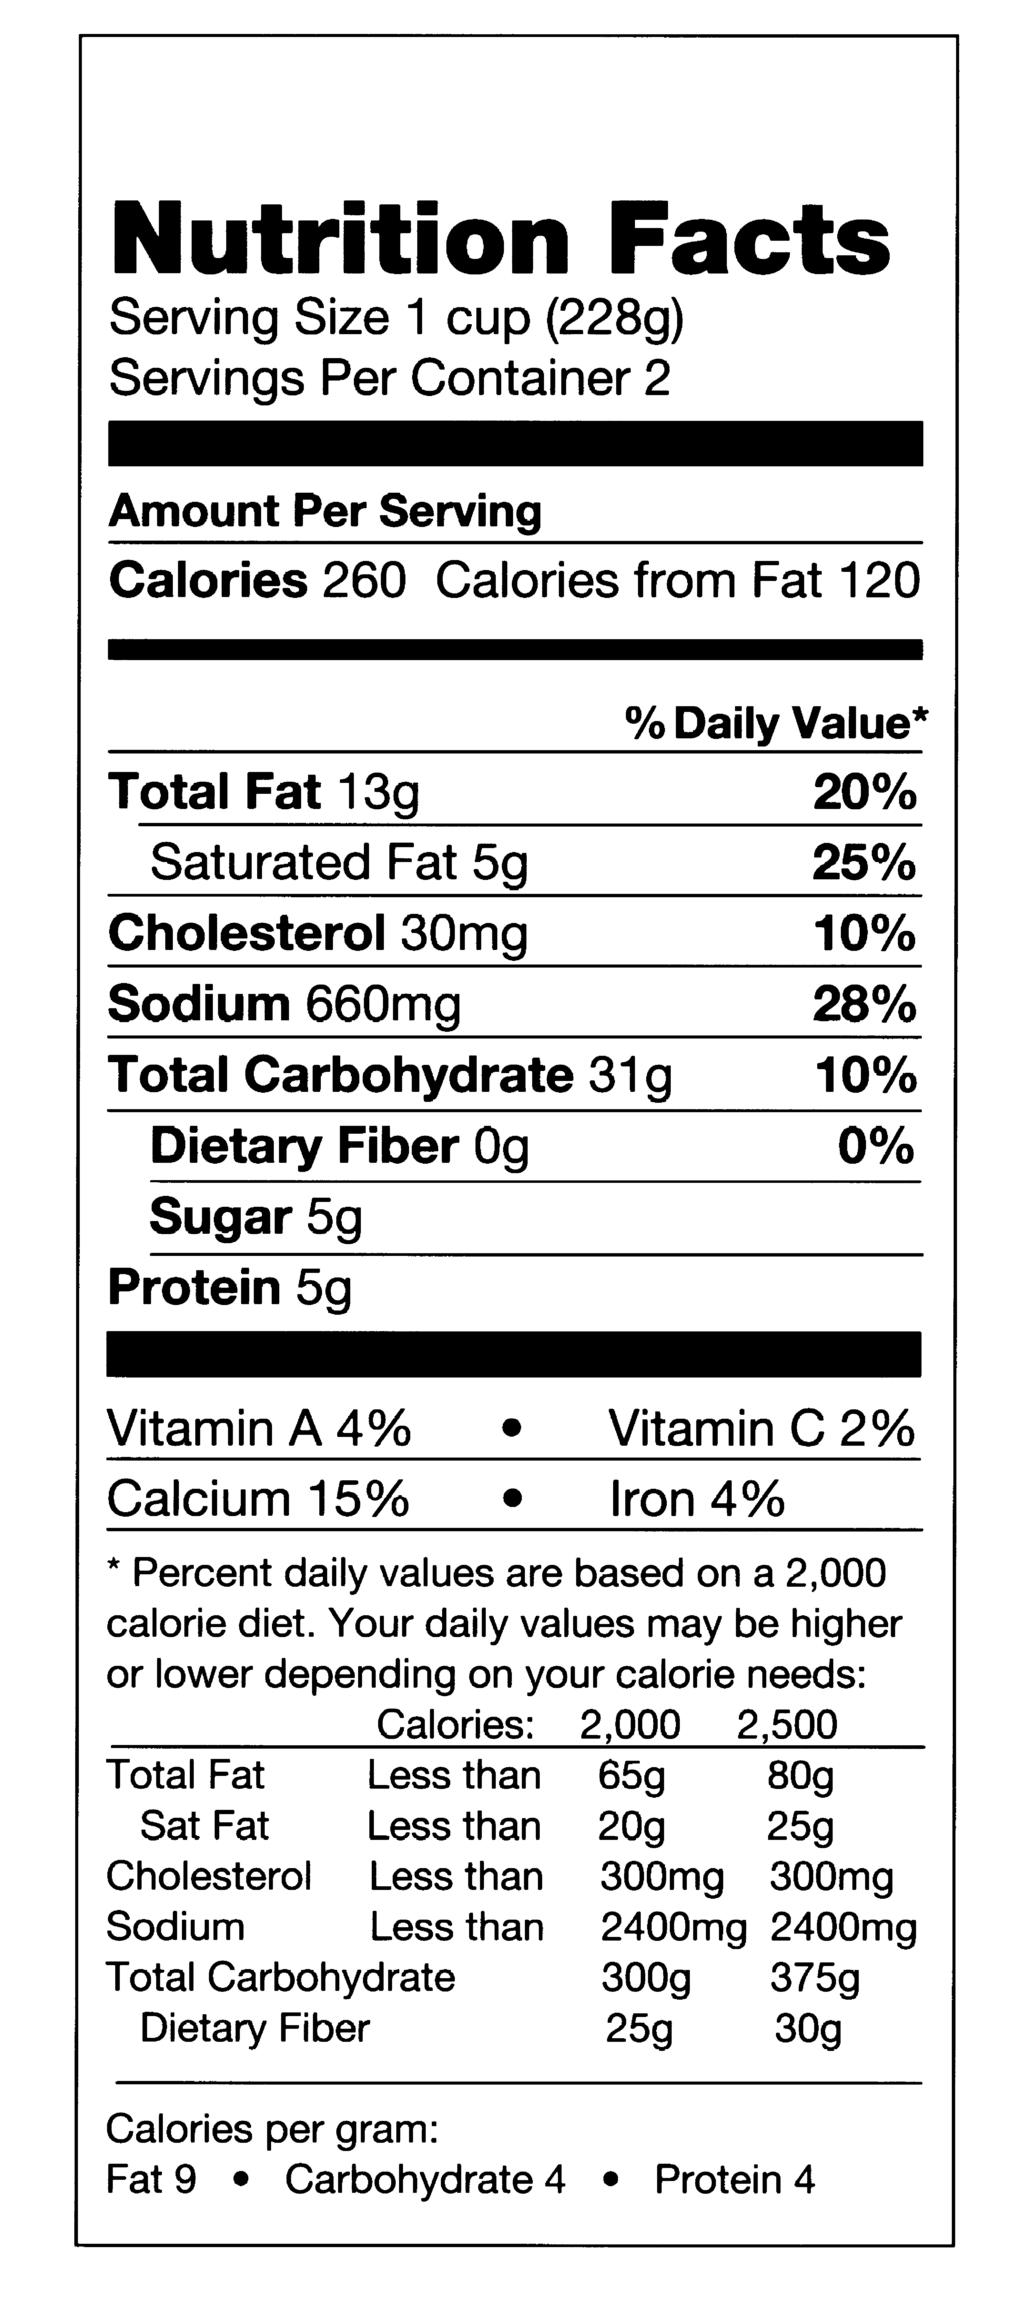 For each question circle the below. 27. Looking at the Nutrition Facts label to the right, what is the serving size? Don t know 1 cup 2 cups 4 cups 28.